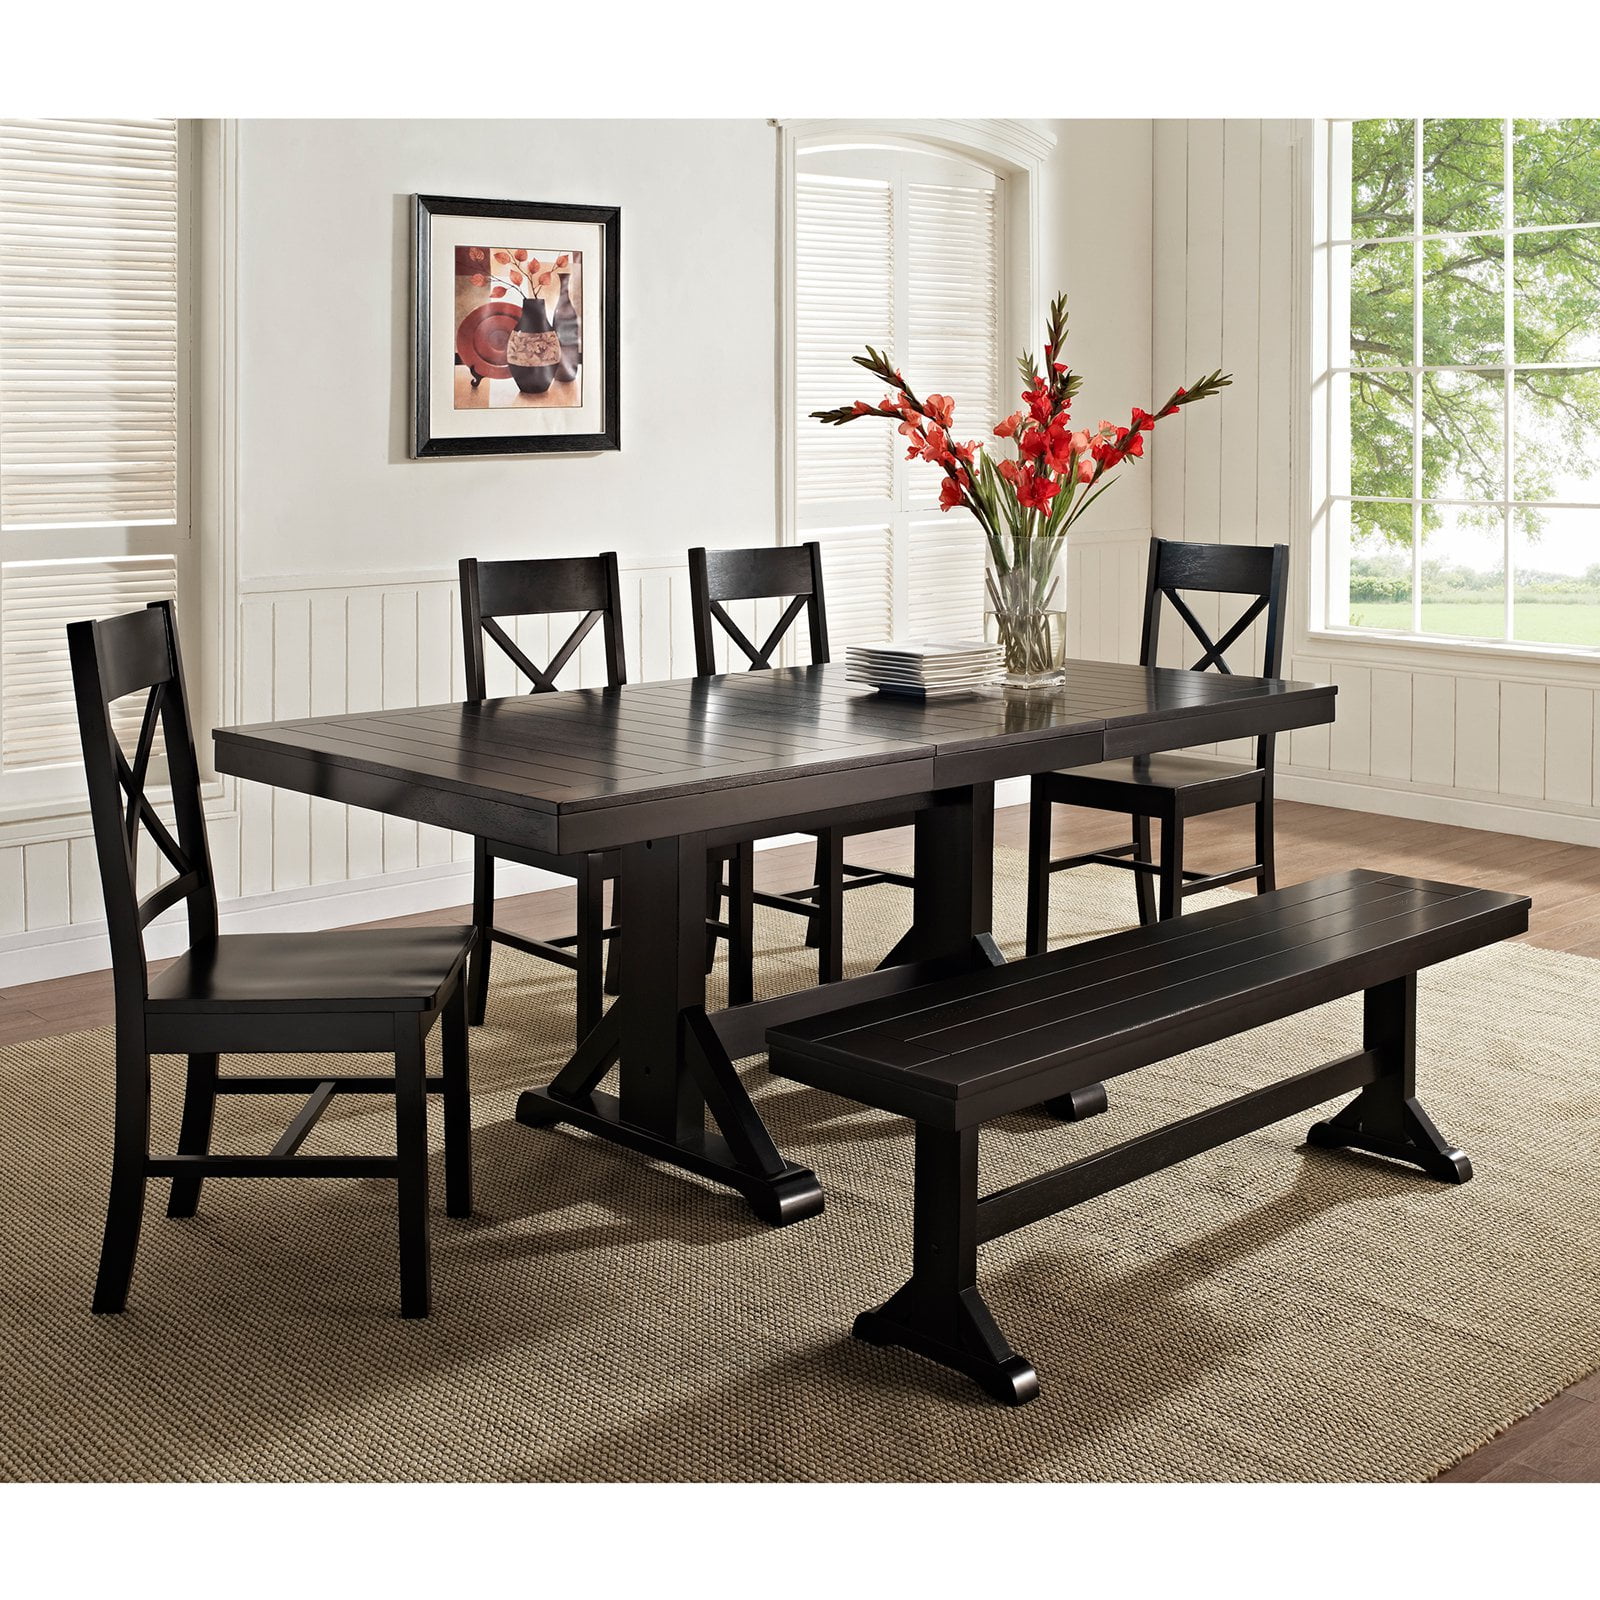 Walker Edison Black 6 Piece Solid Wood, Black Kitchen Table And Chairs Bench